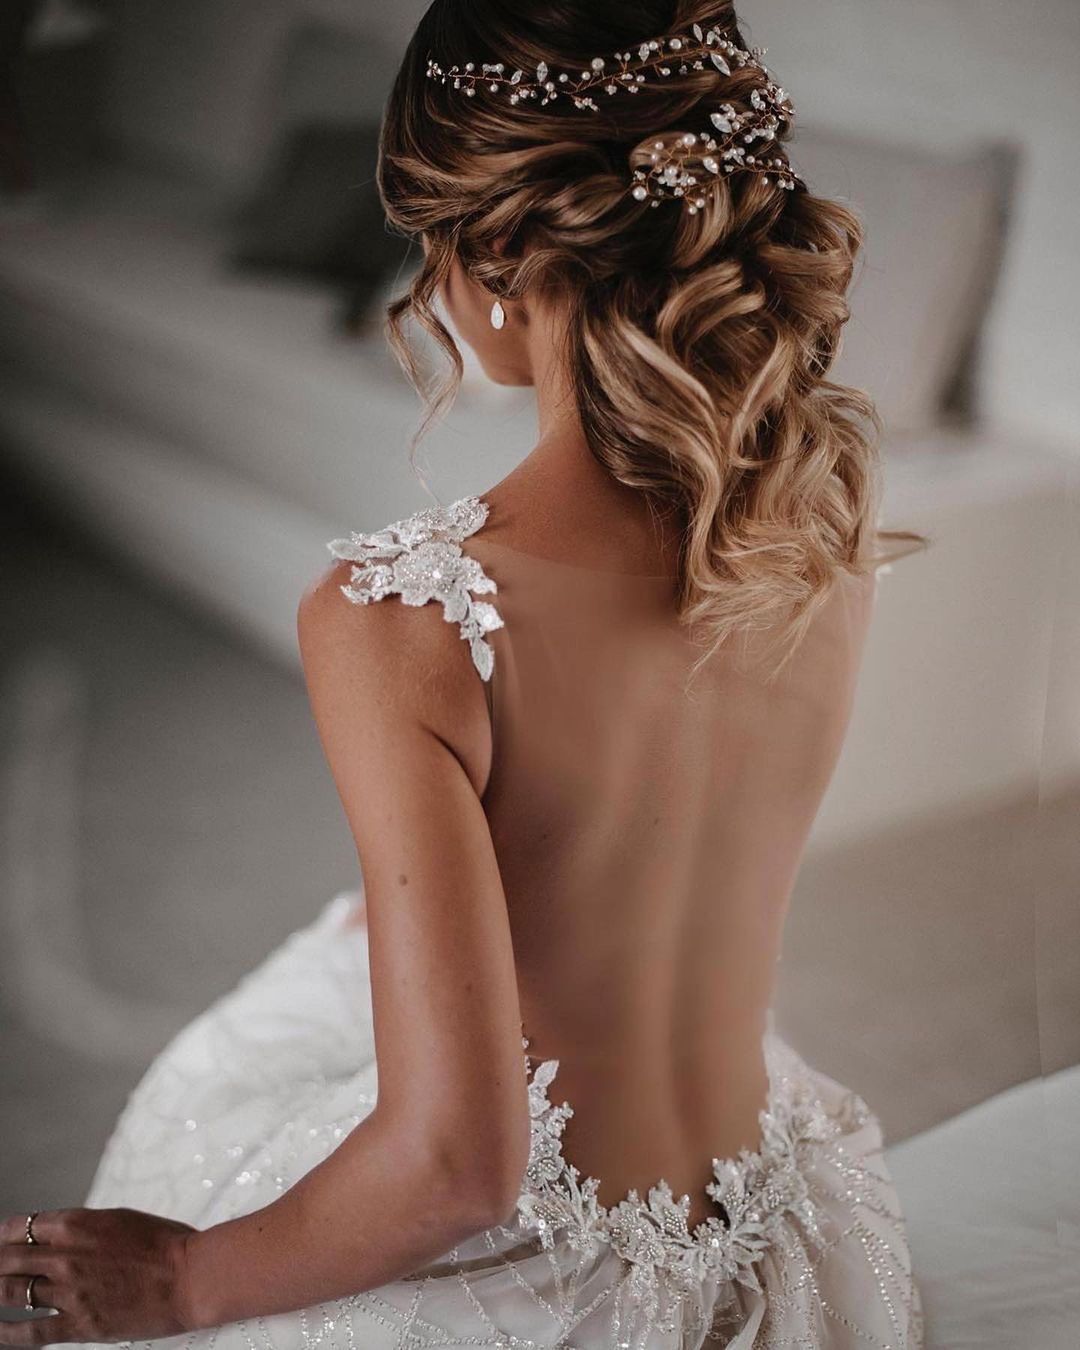 Medium length wedding hairstyle with accessories